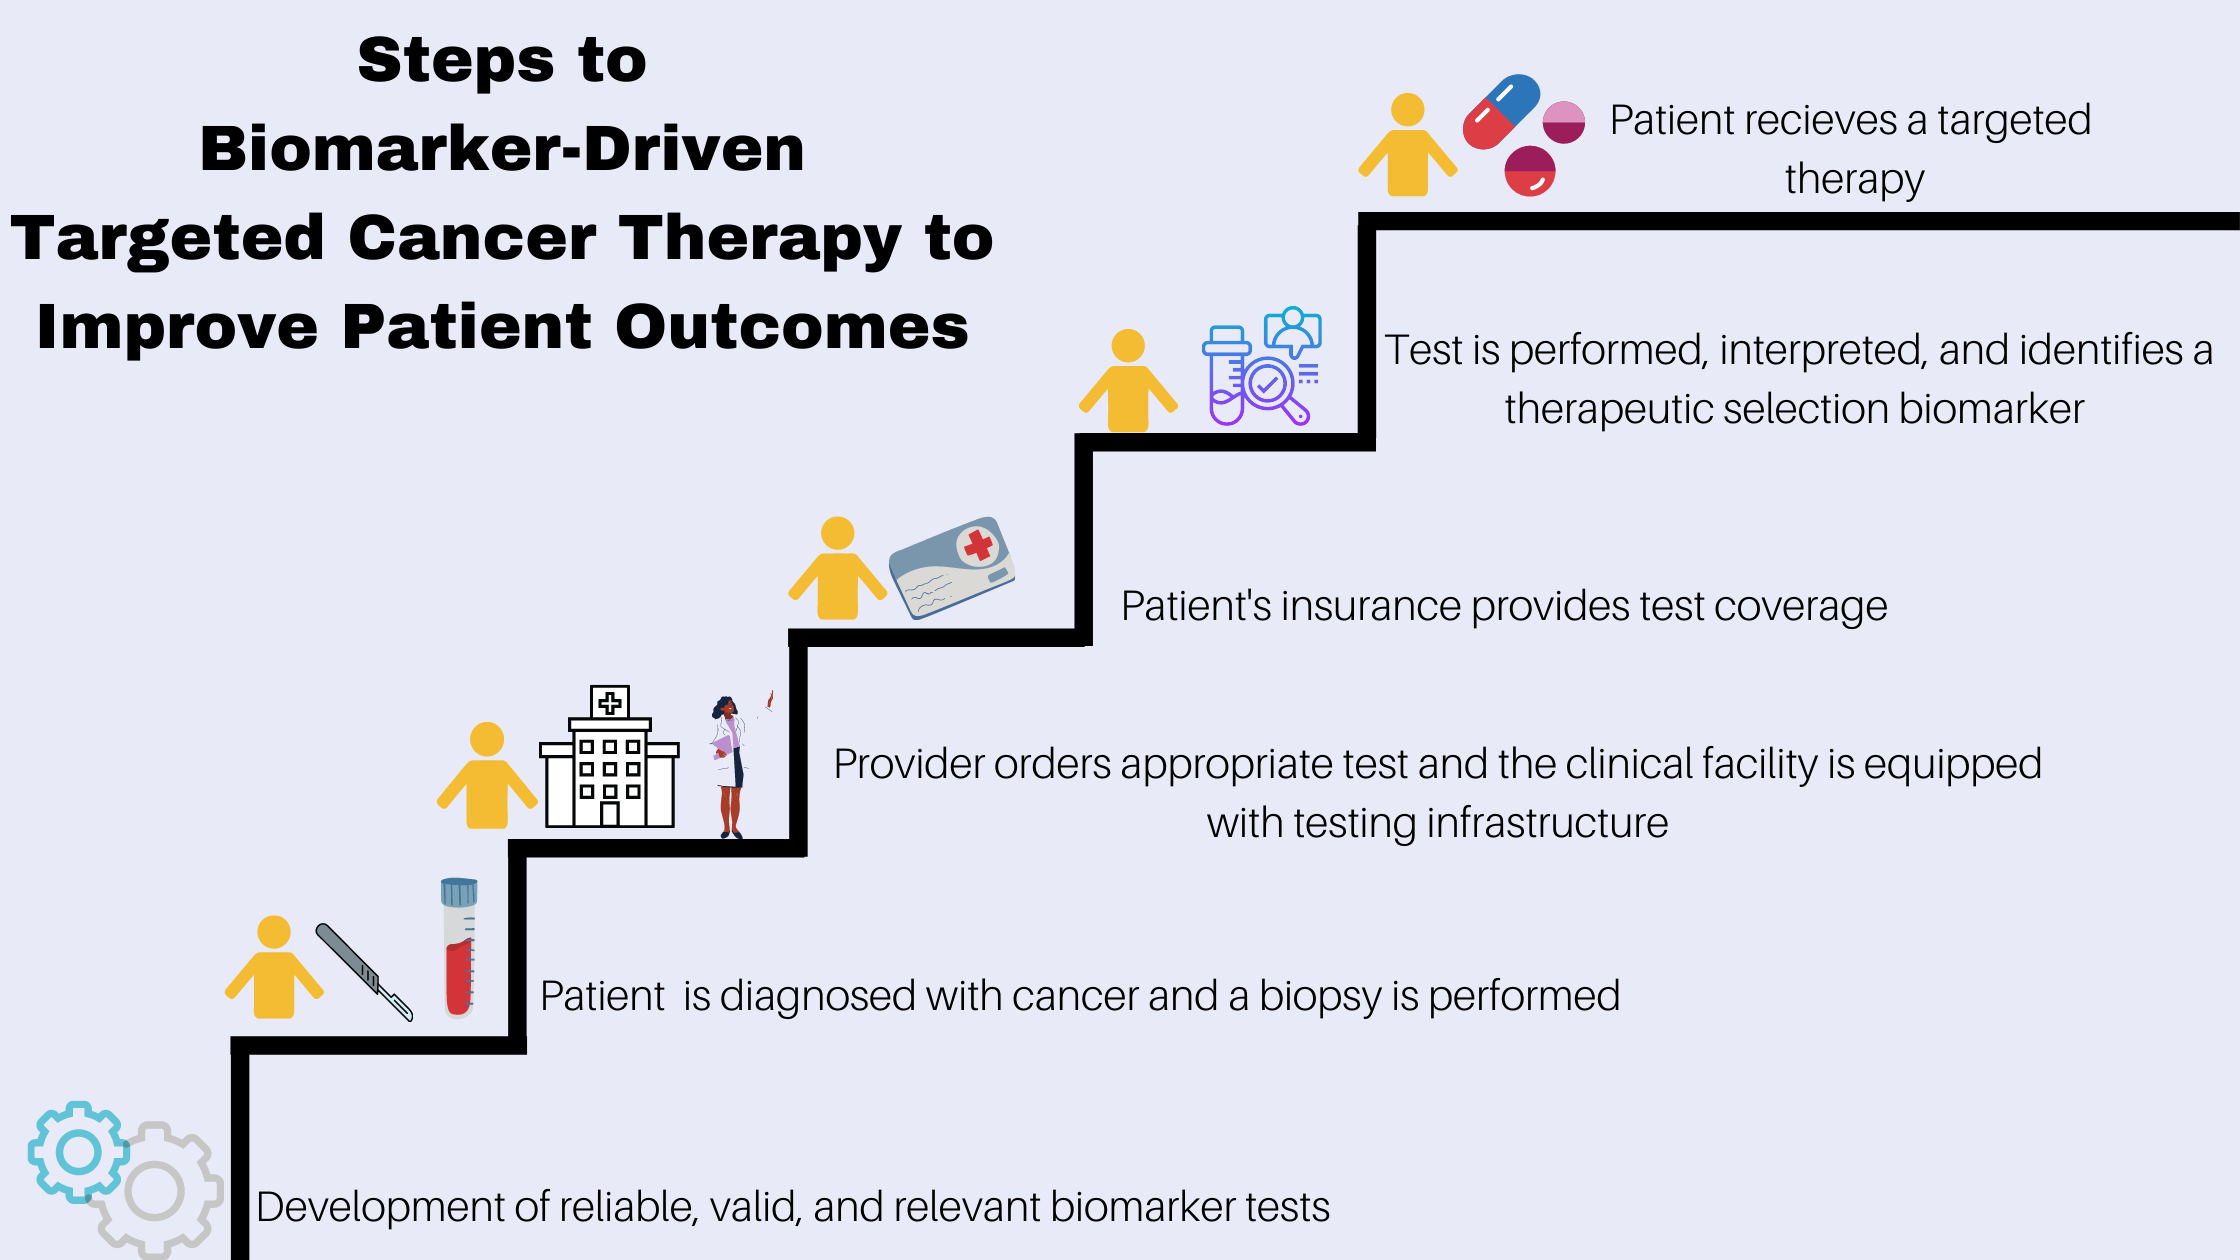 Steps to Biomarker Driven Targeted Cancer Therapy